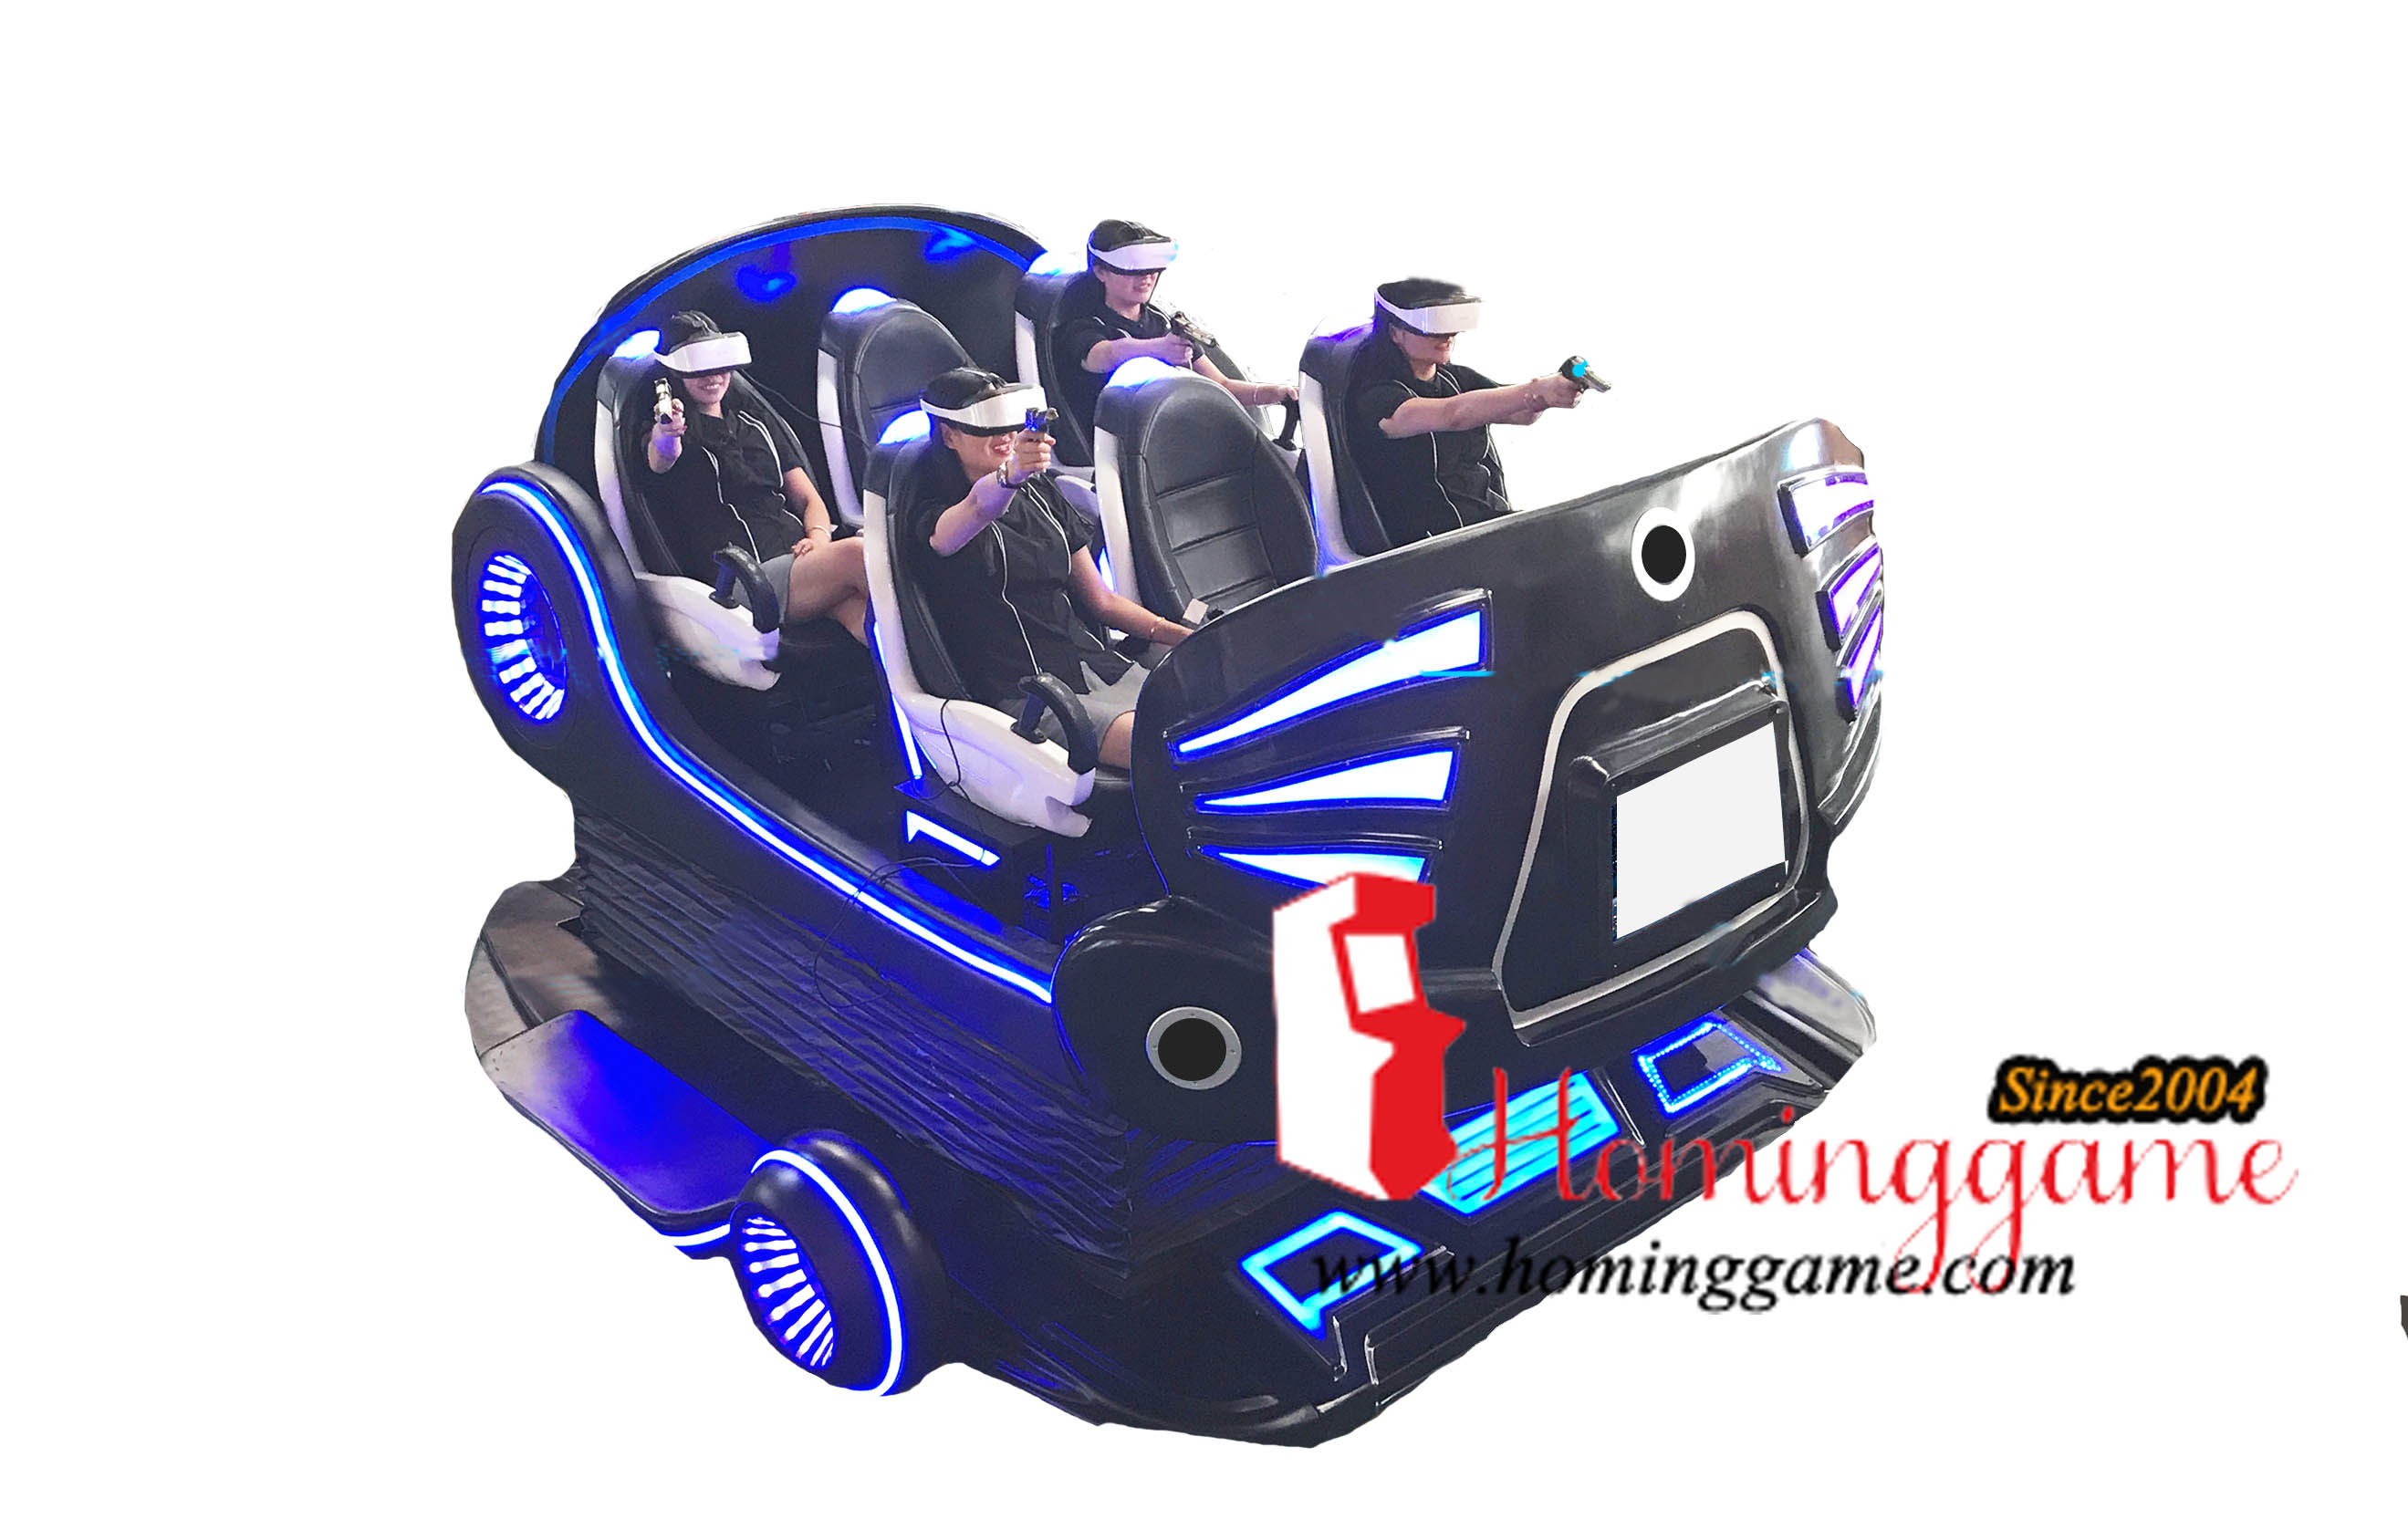 2018 Hot 6 Seats 9D VR Cineam Theater|6 Seat 9D VR Cinema|9D VR Game 